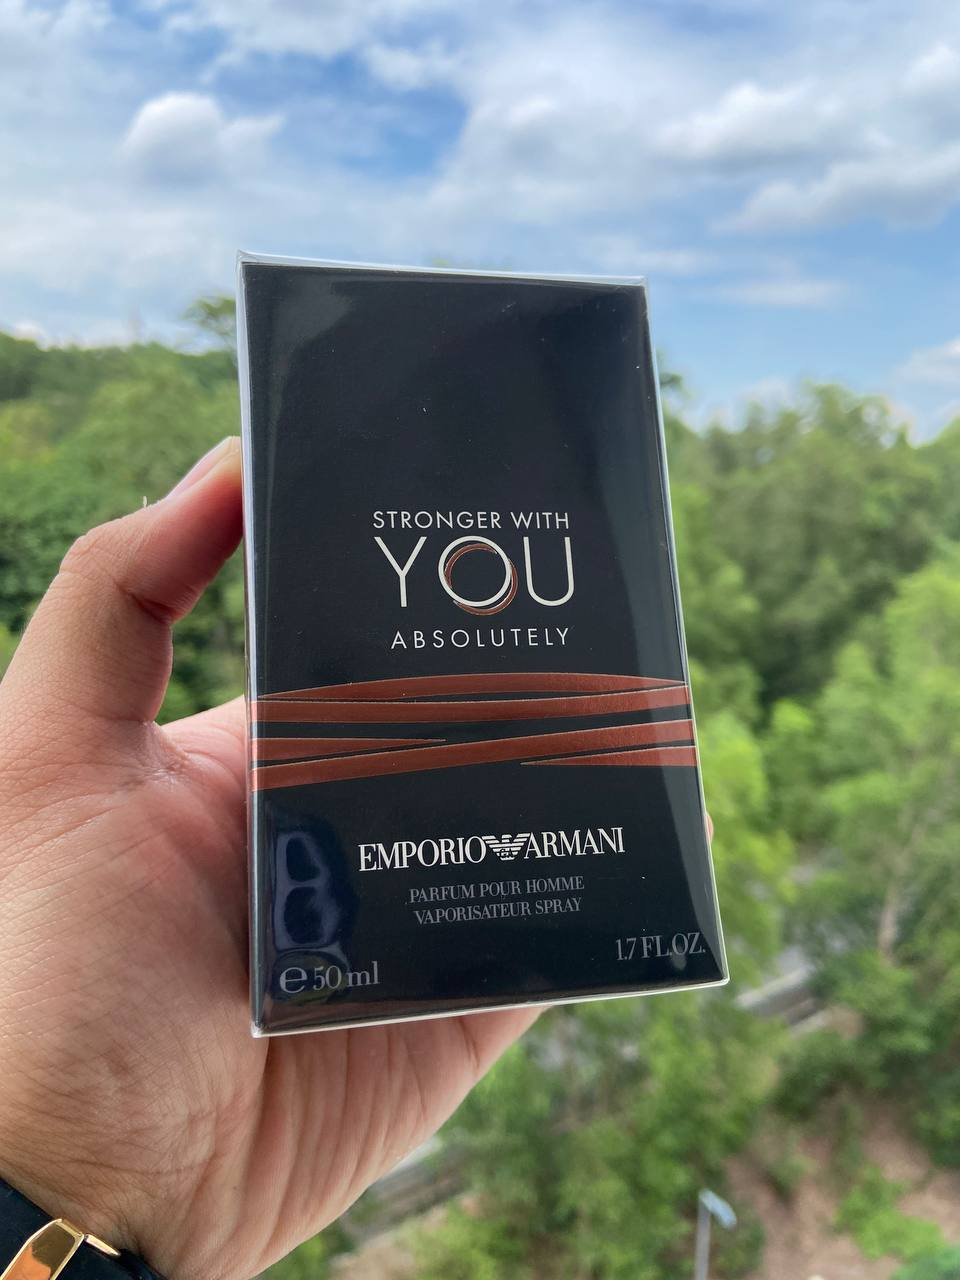 Emporio Armani Stronger With You Absolutely Parfum Pour Homme 50ml for Him